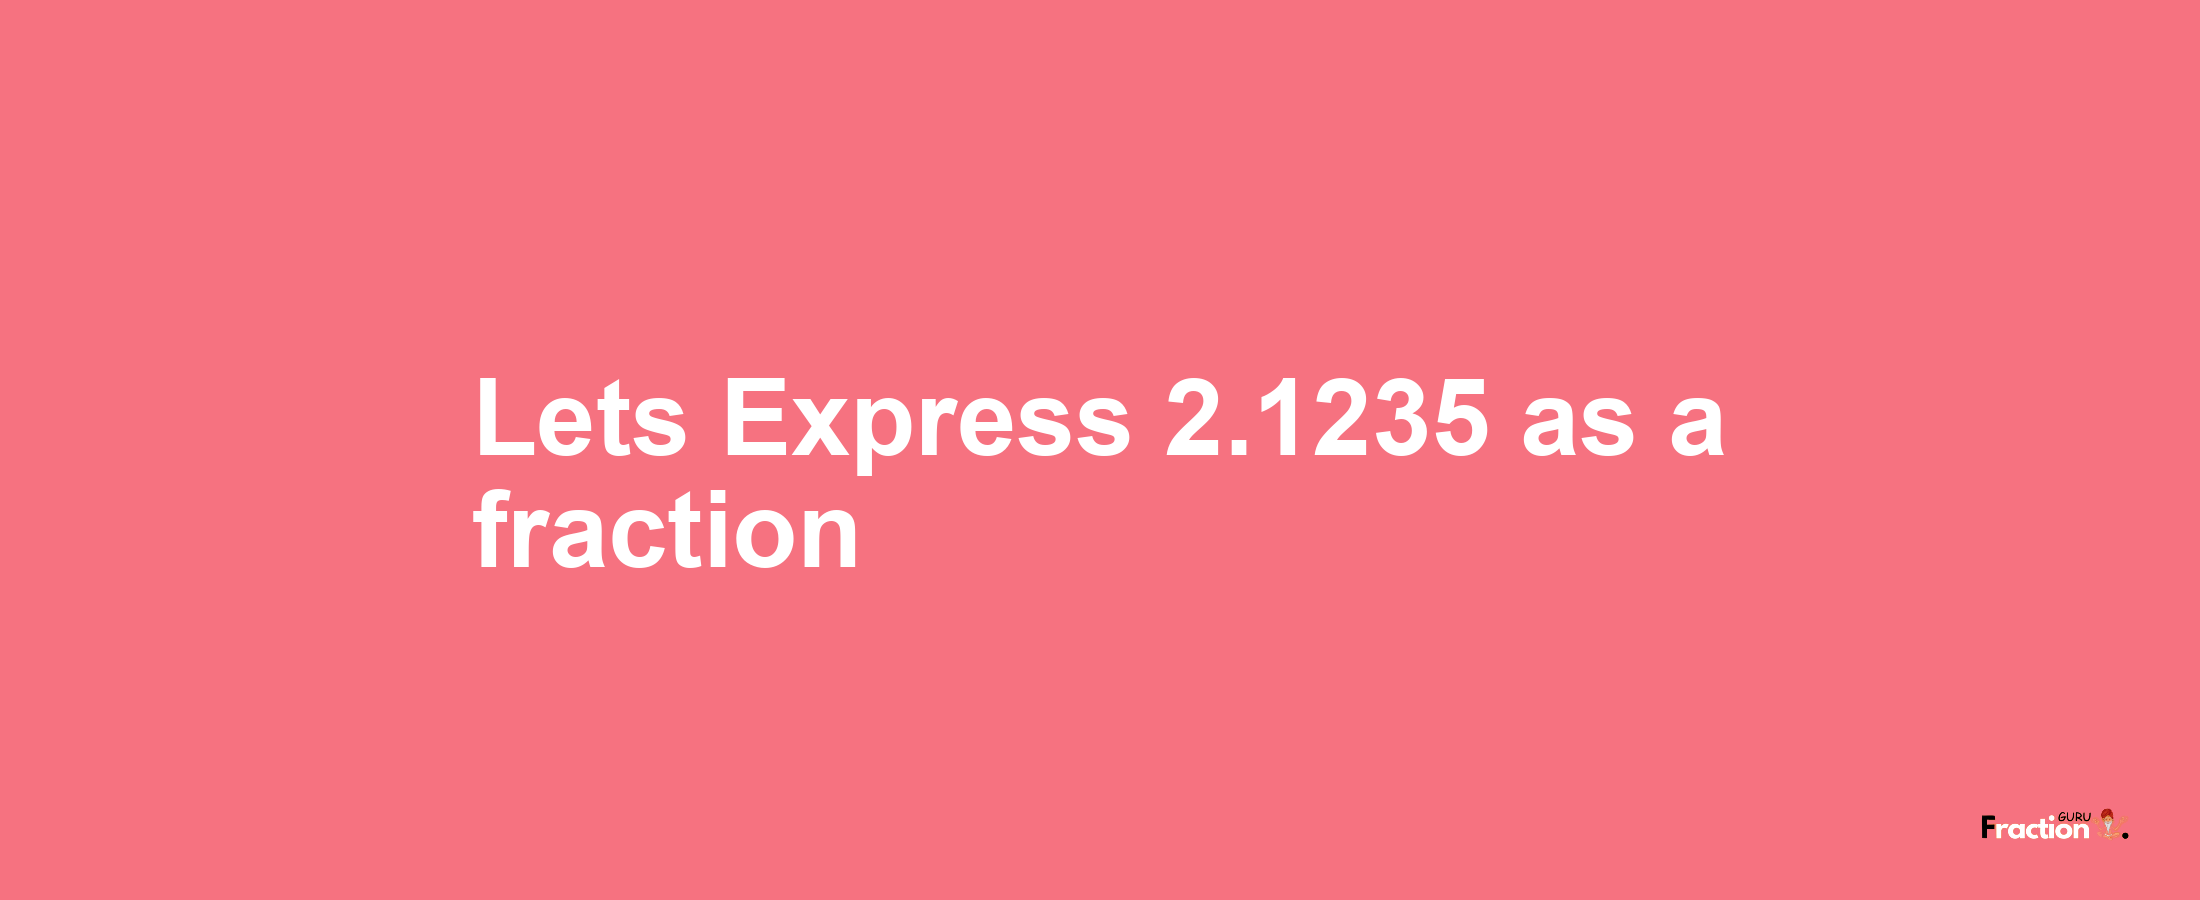 Lets Express 2.1235 as afraction